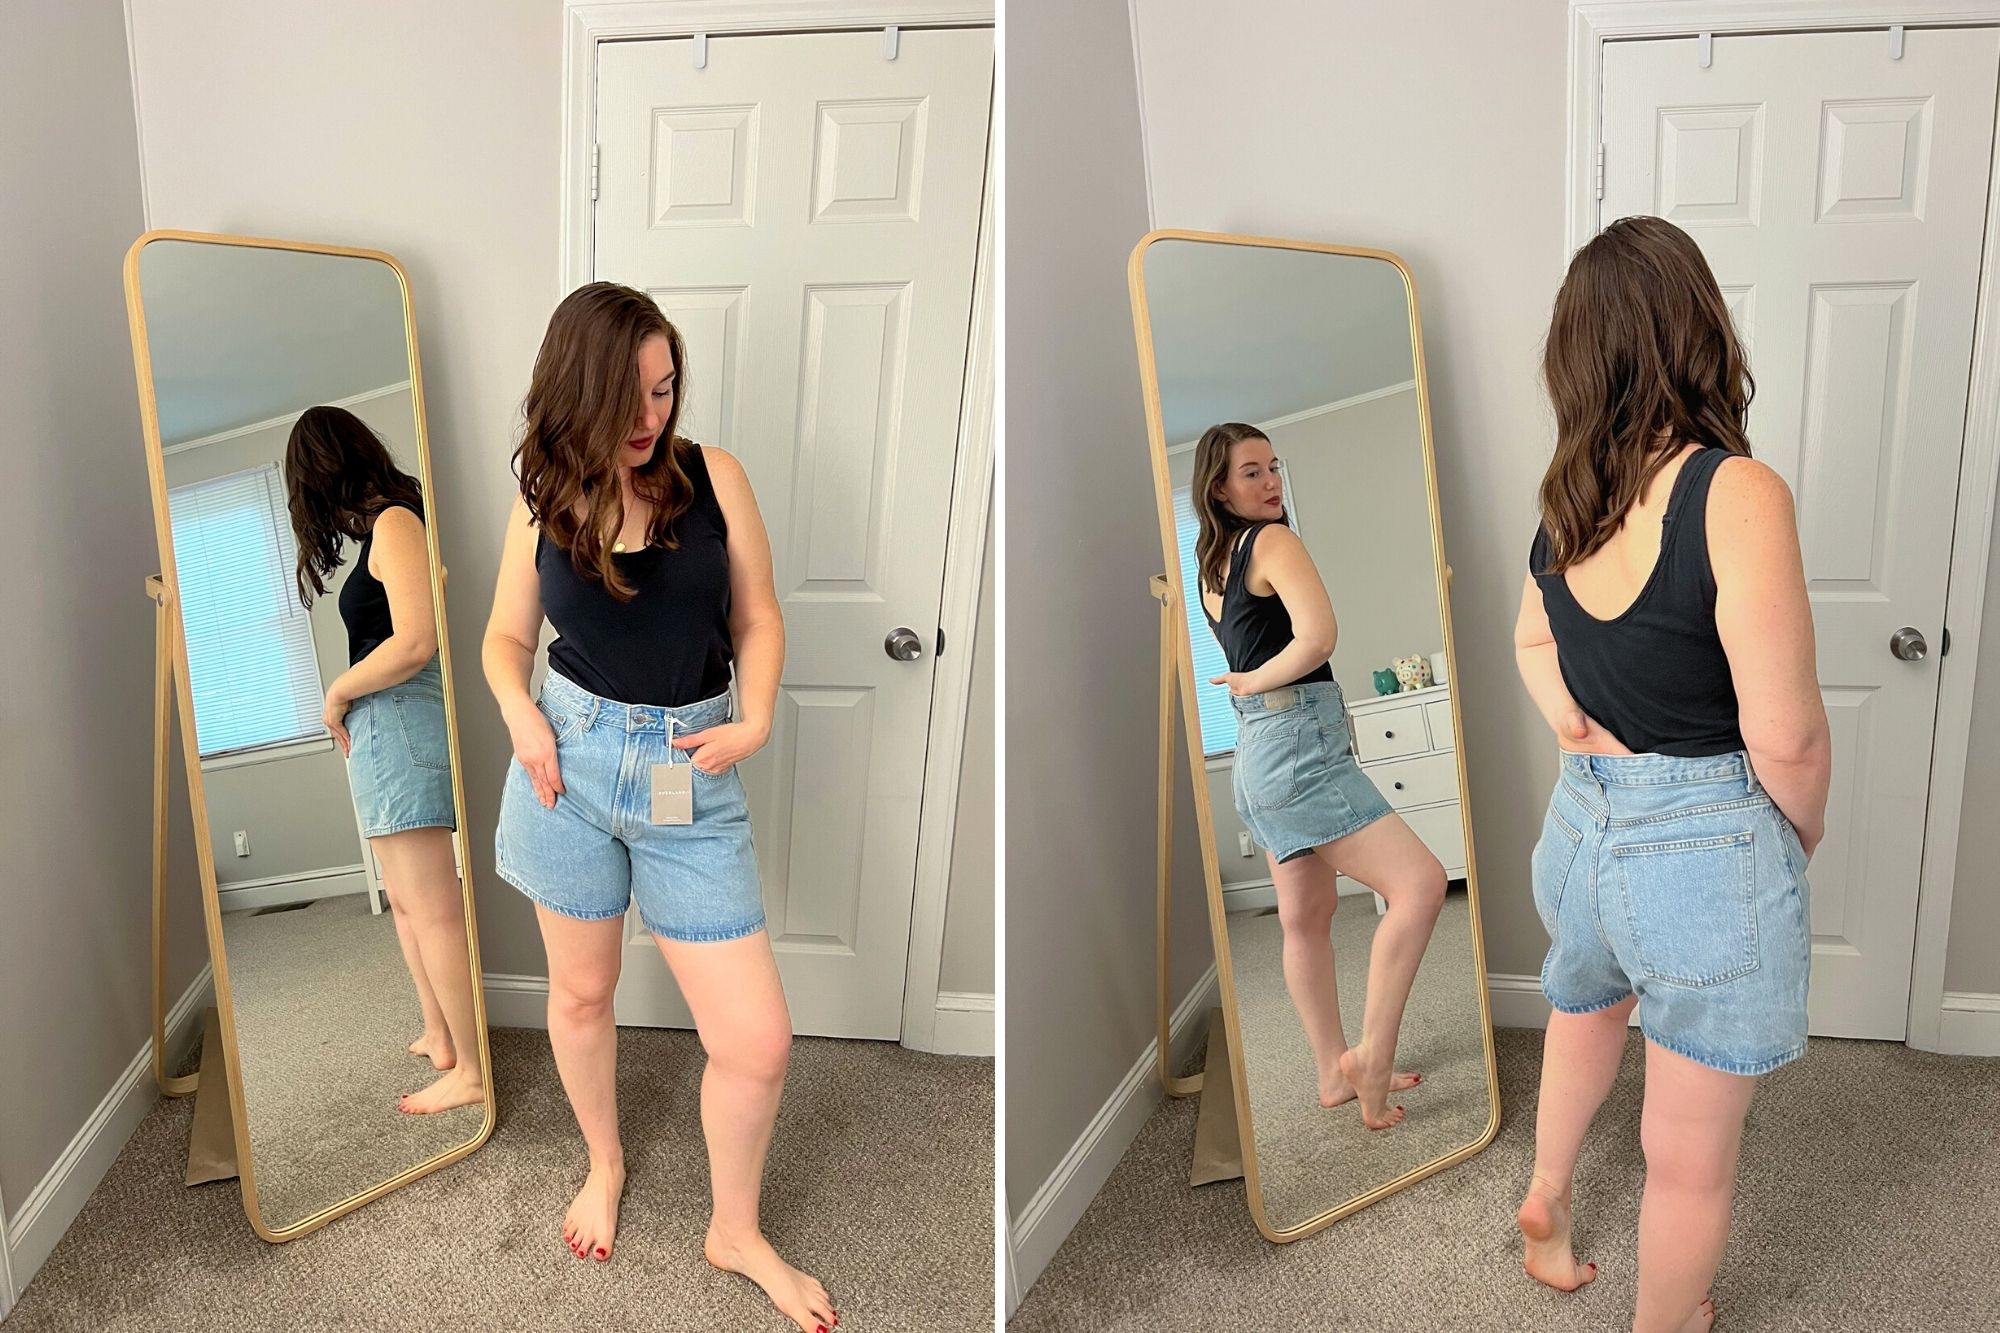 Alyssa wears the shorts in two different images